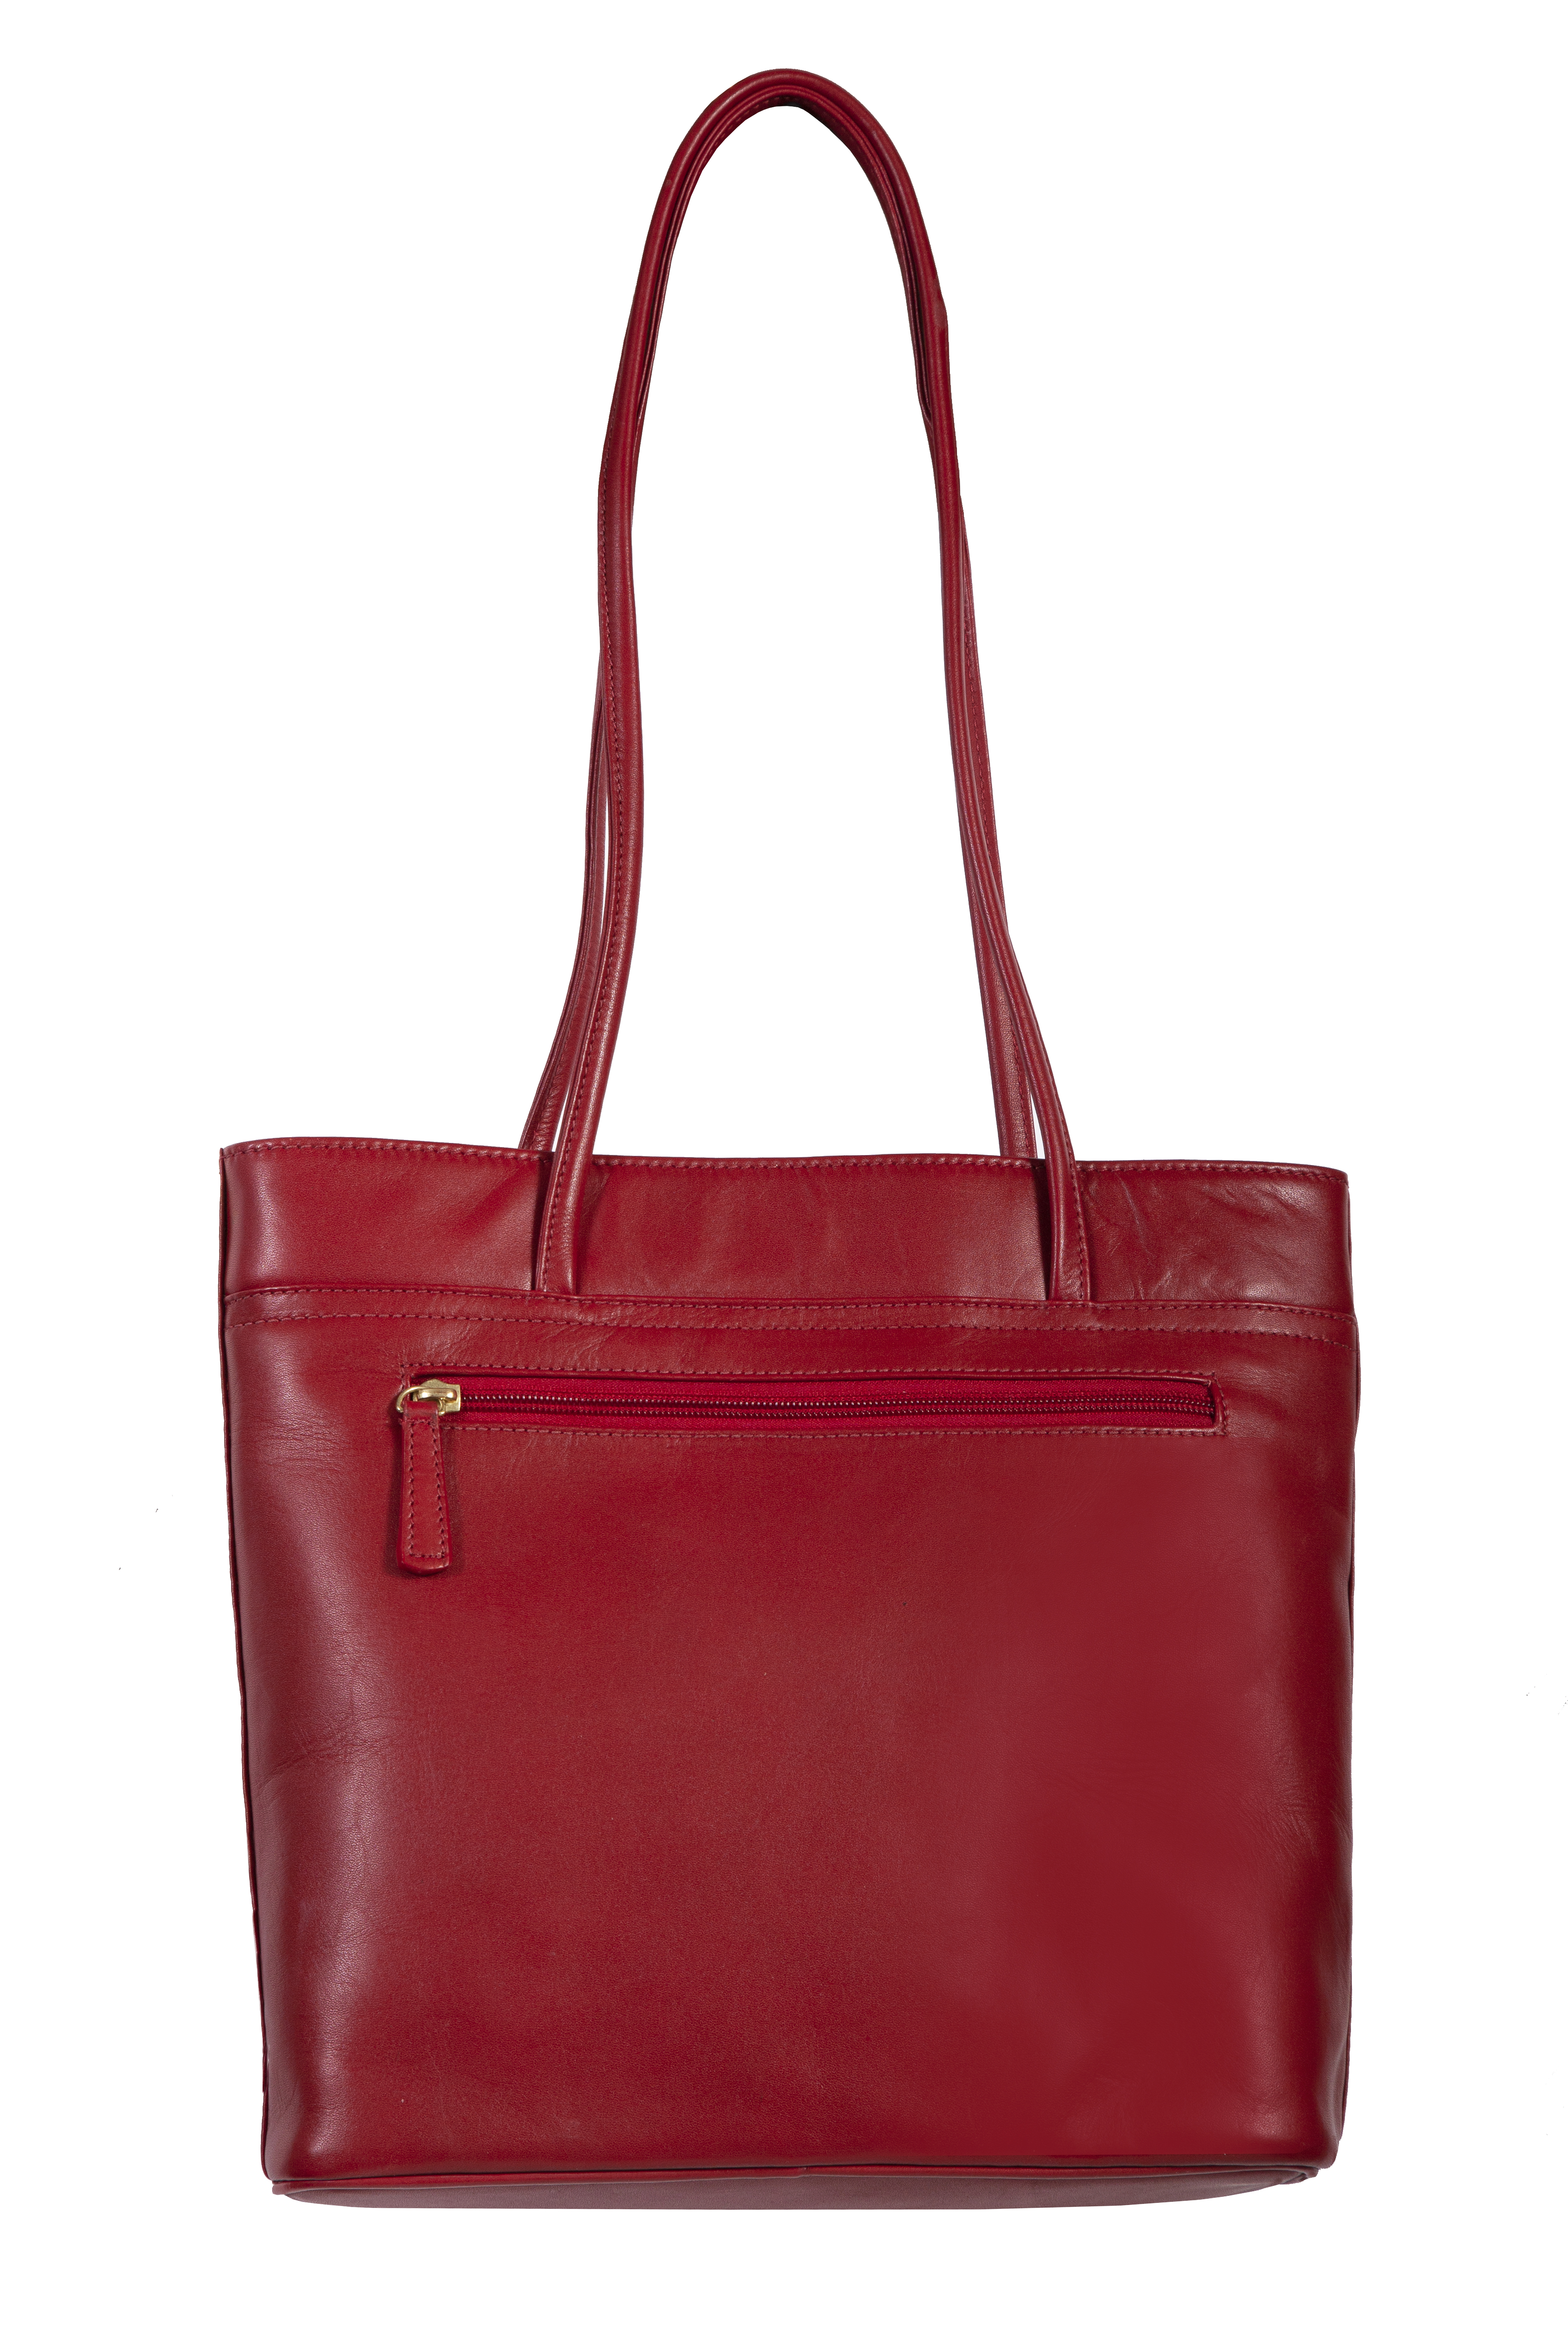 Scully Leather Handbag - Red #2